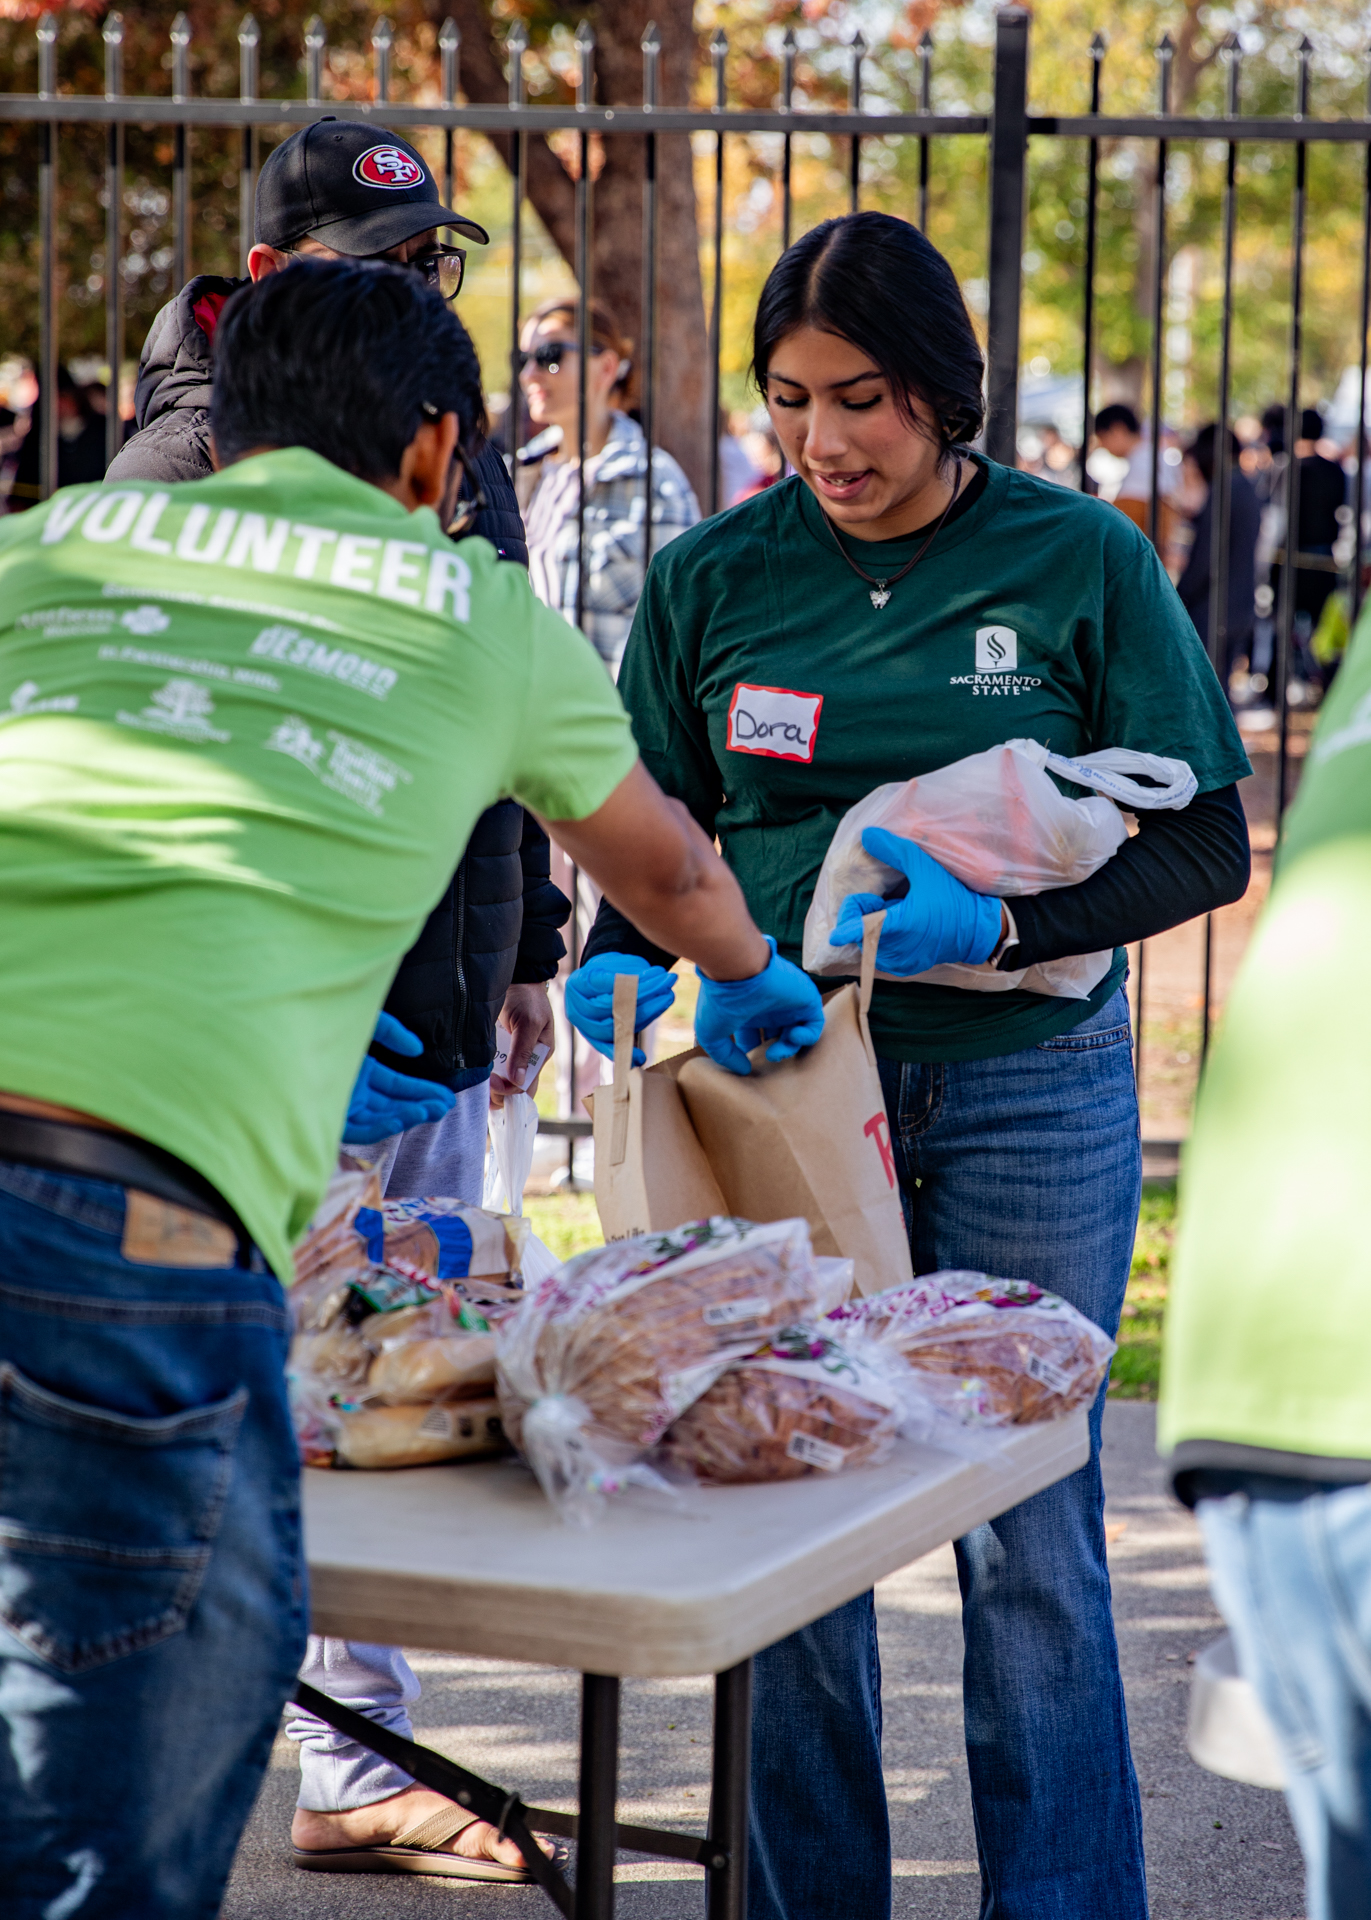 Volunteers pack items for those experiencing food insecurity during a recent food distribution event.